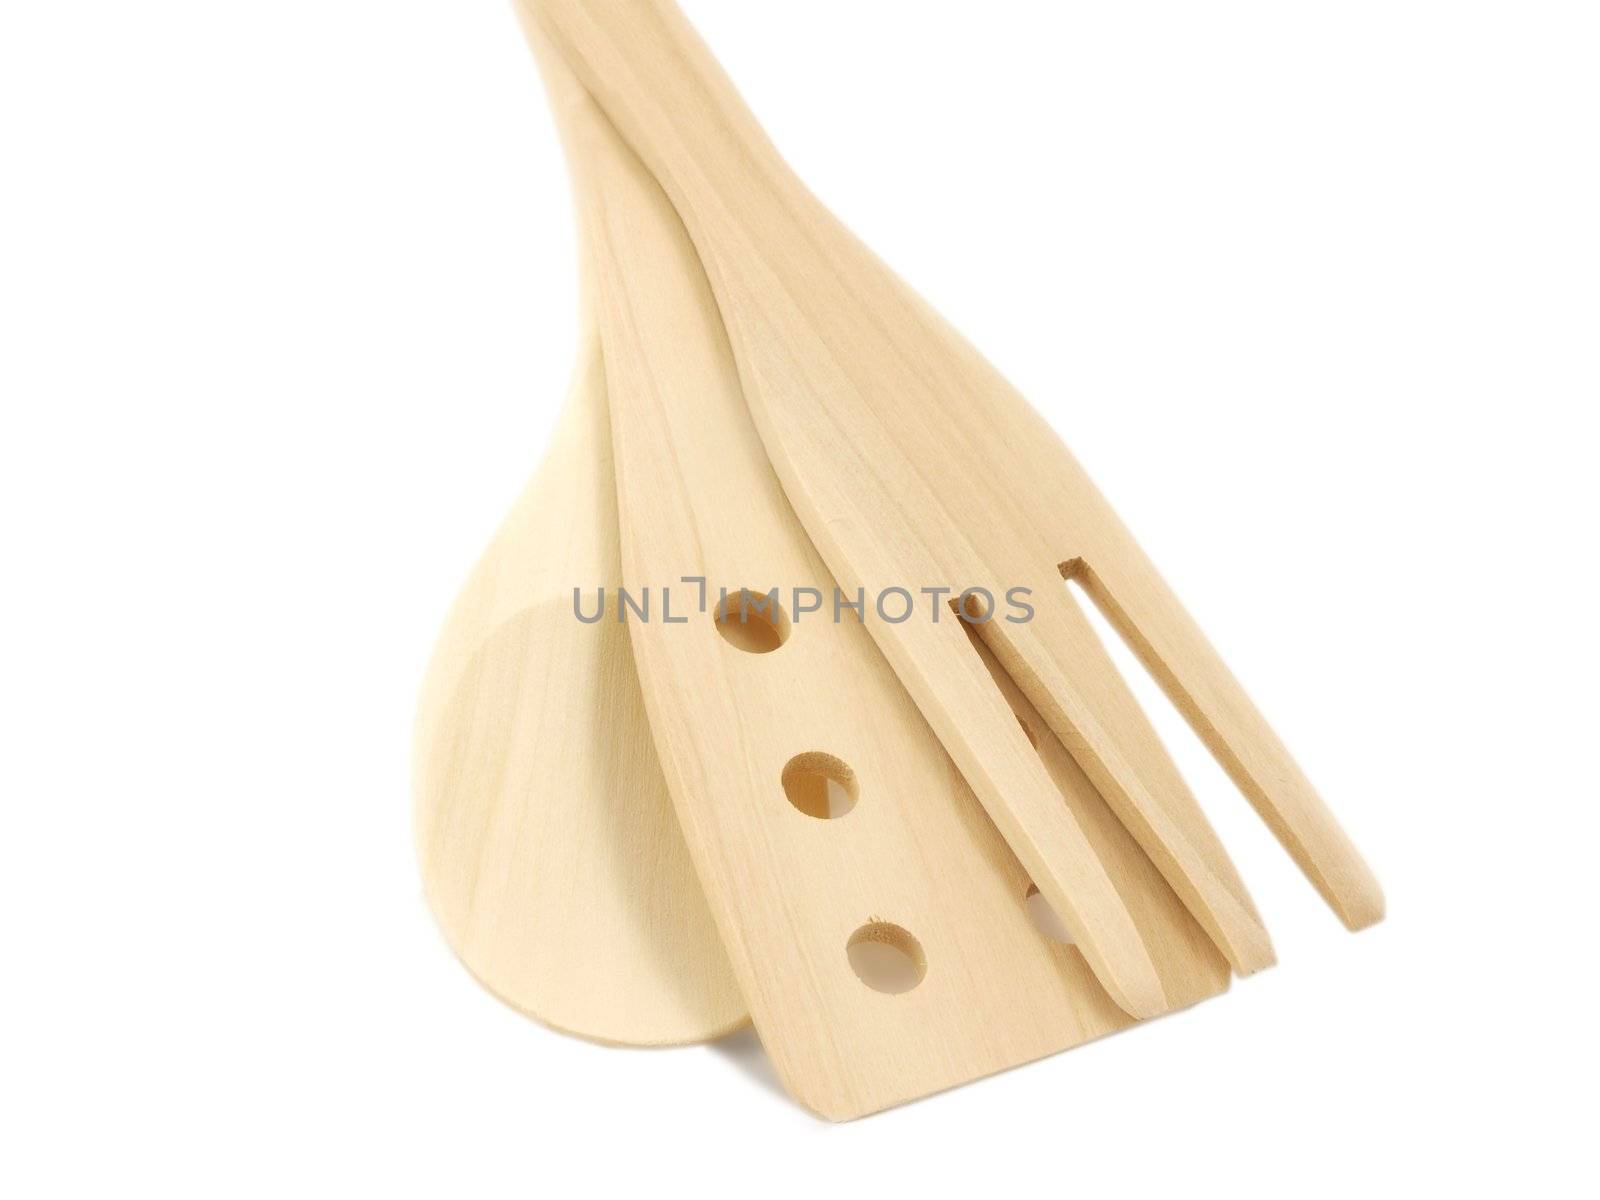 Group of wooden spatulas, isolated towards white background